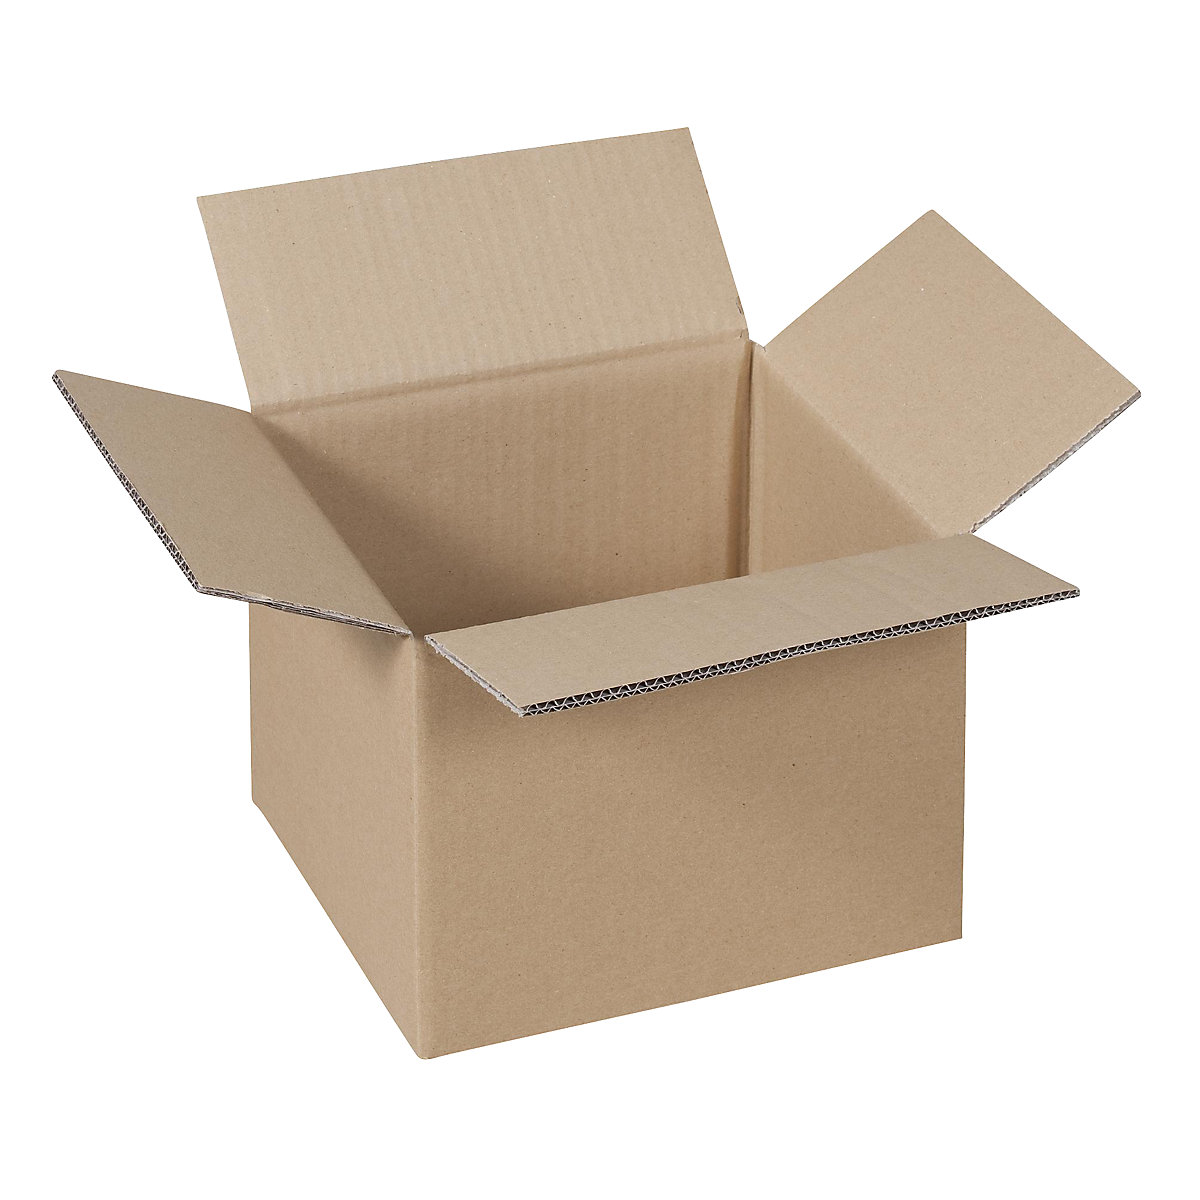 Folding cardboard box, FEFCO 0201, made of double fluted cardboard, internal dimensions 315 x 220 x 140 mm, pack of 100-21